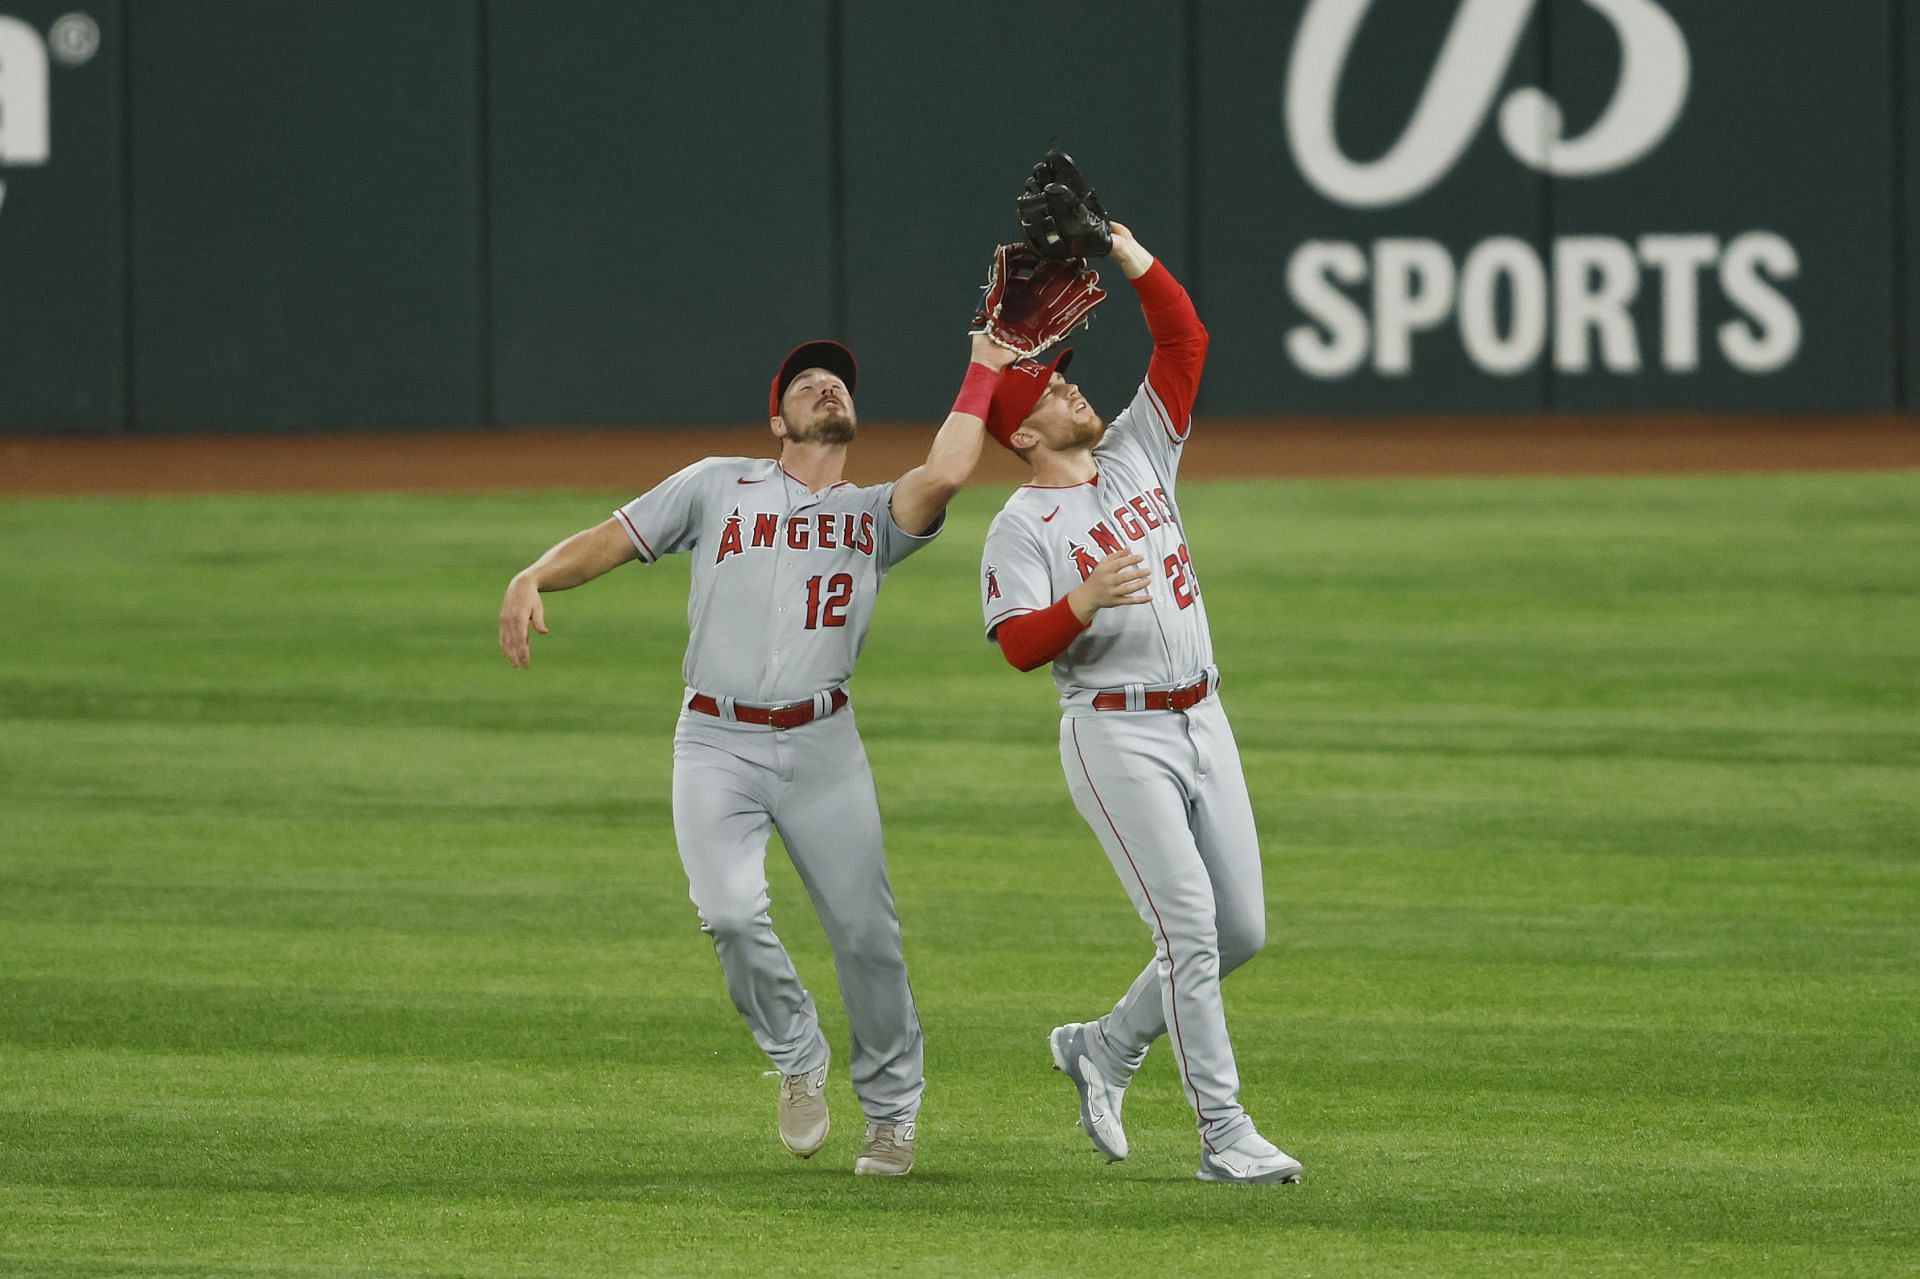 The Los Angeles Angels defeated the Texas Rangers 9-6 in the opening game of a crucial series on Monday.